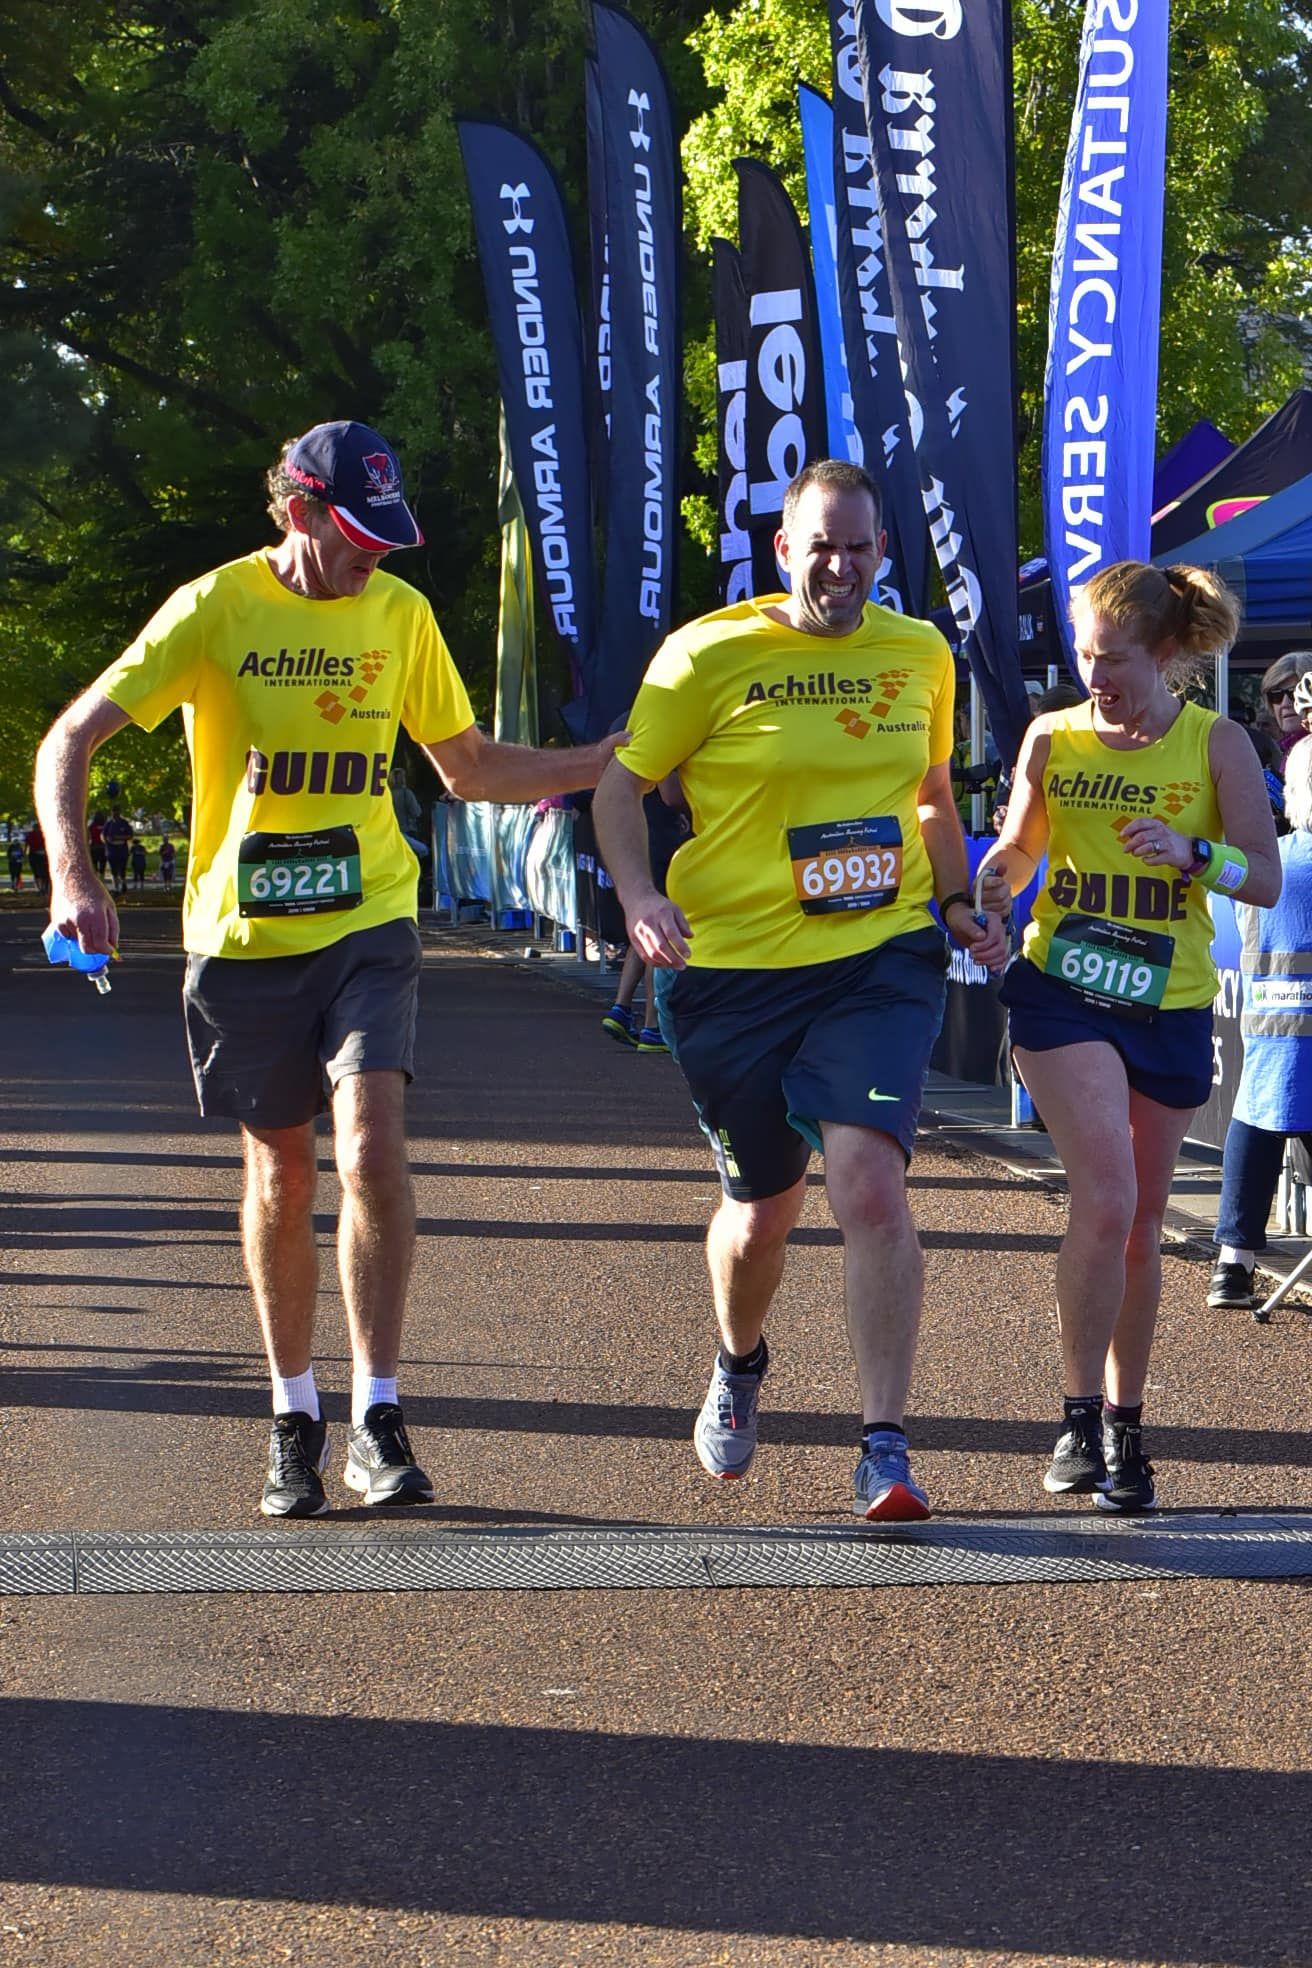 Rocco running at a race guided by a running rope/tether, flanked by another runner and his guide